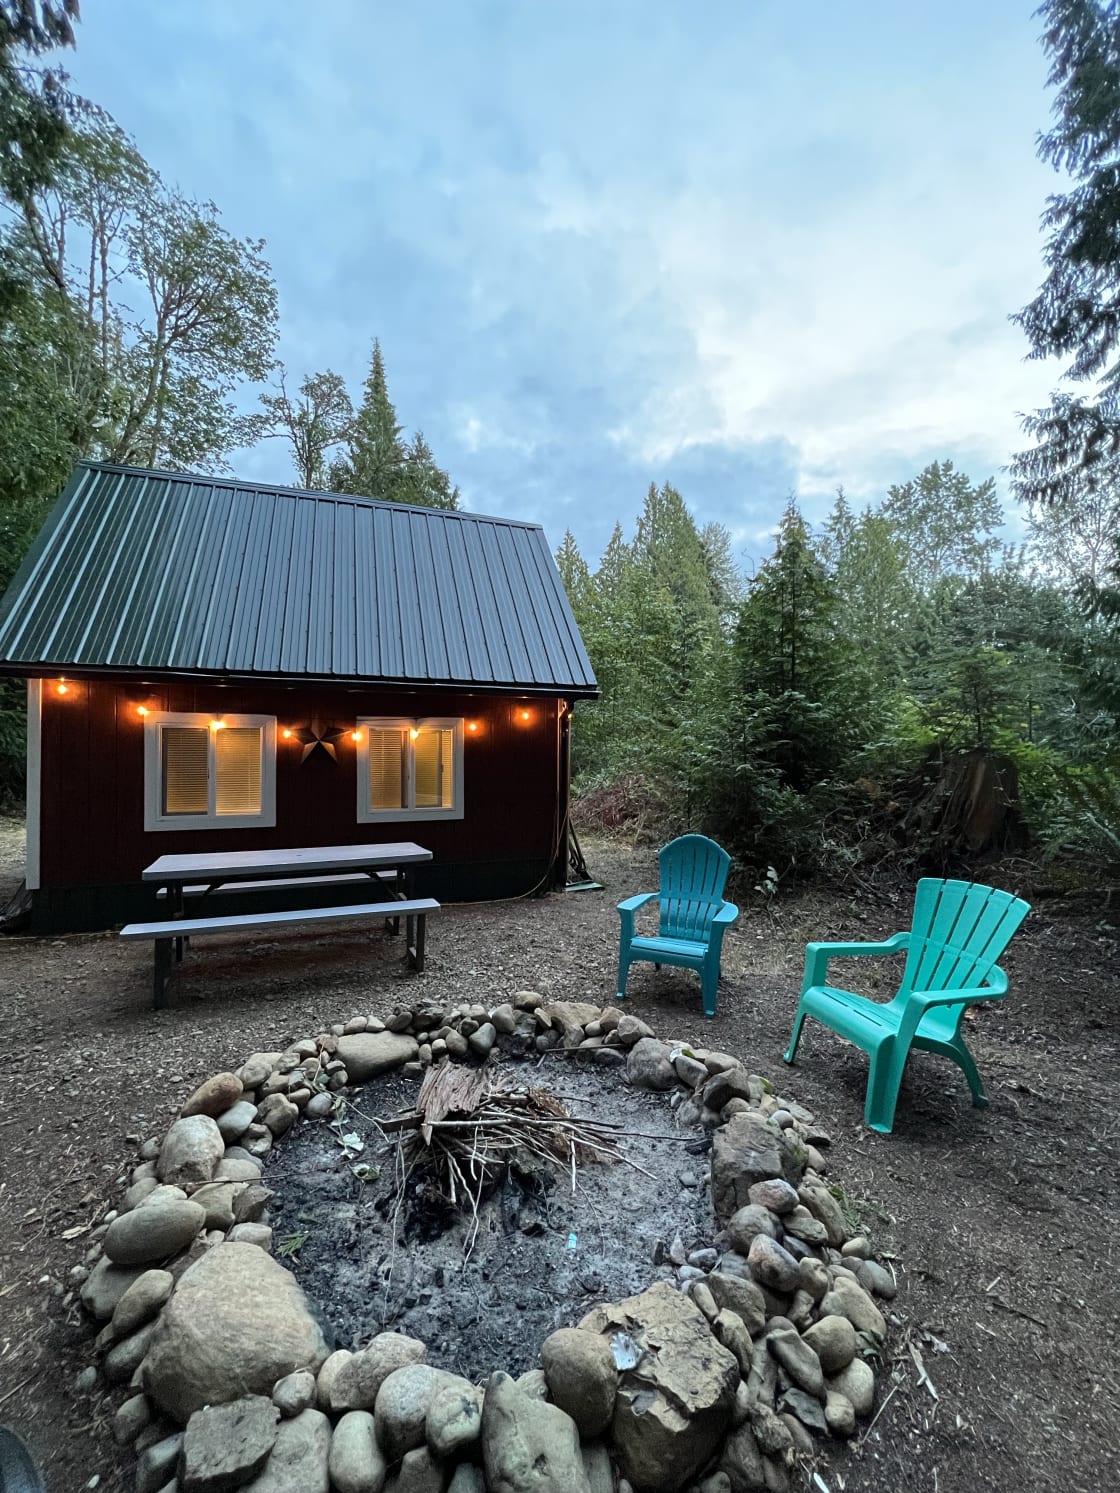 Enjoy an evening around the fire.  2 outside chairs and picnic table provided.